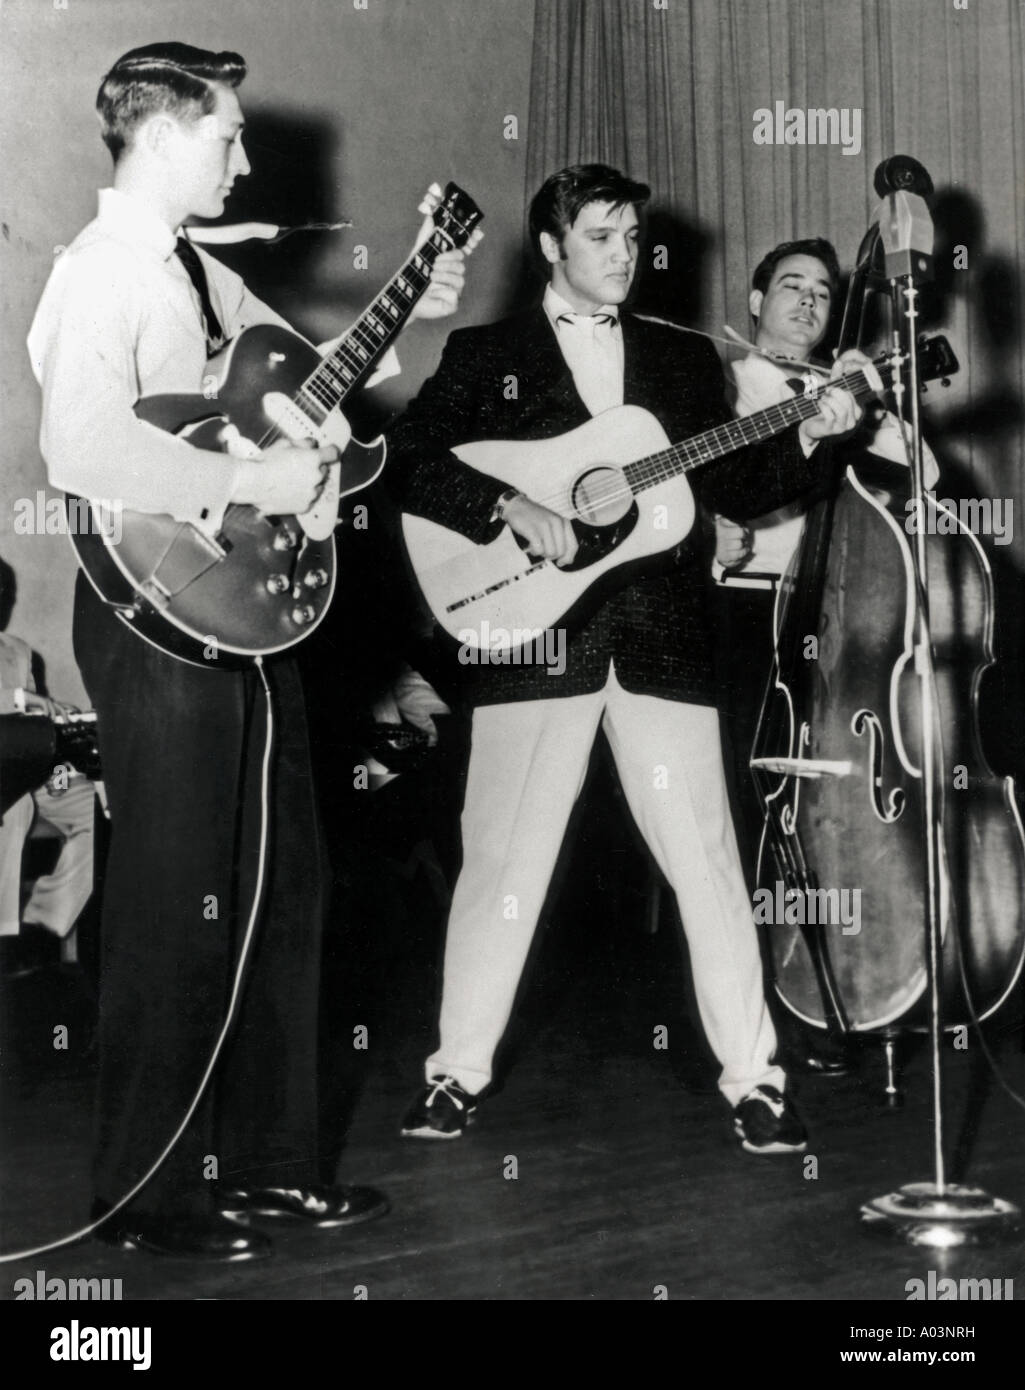 ELVIS PRESLEY with the Blue Moon Boys - Scotty Moore (at left) and Bill Black on bass in 1957 Stock Photo